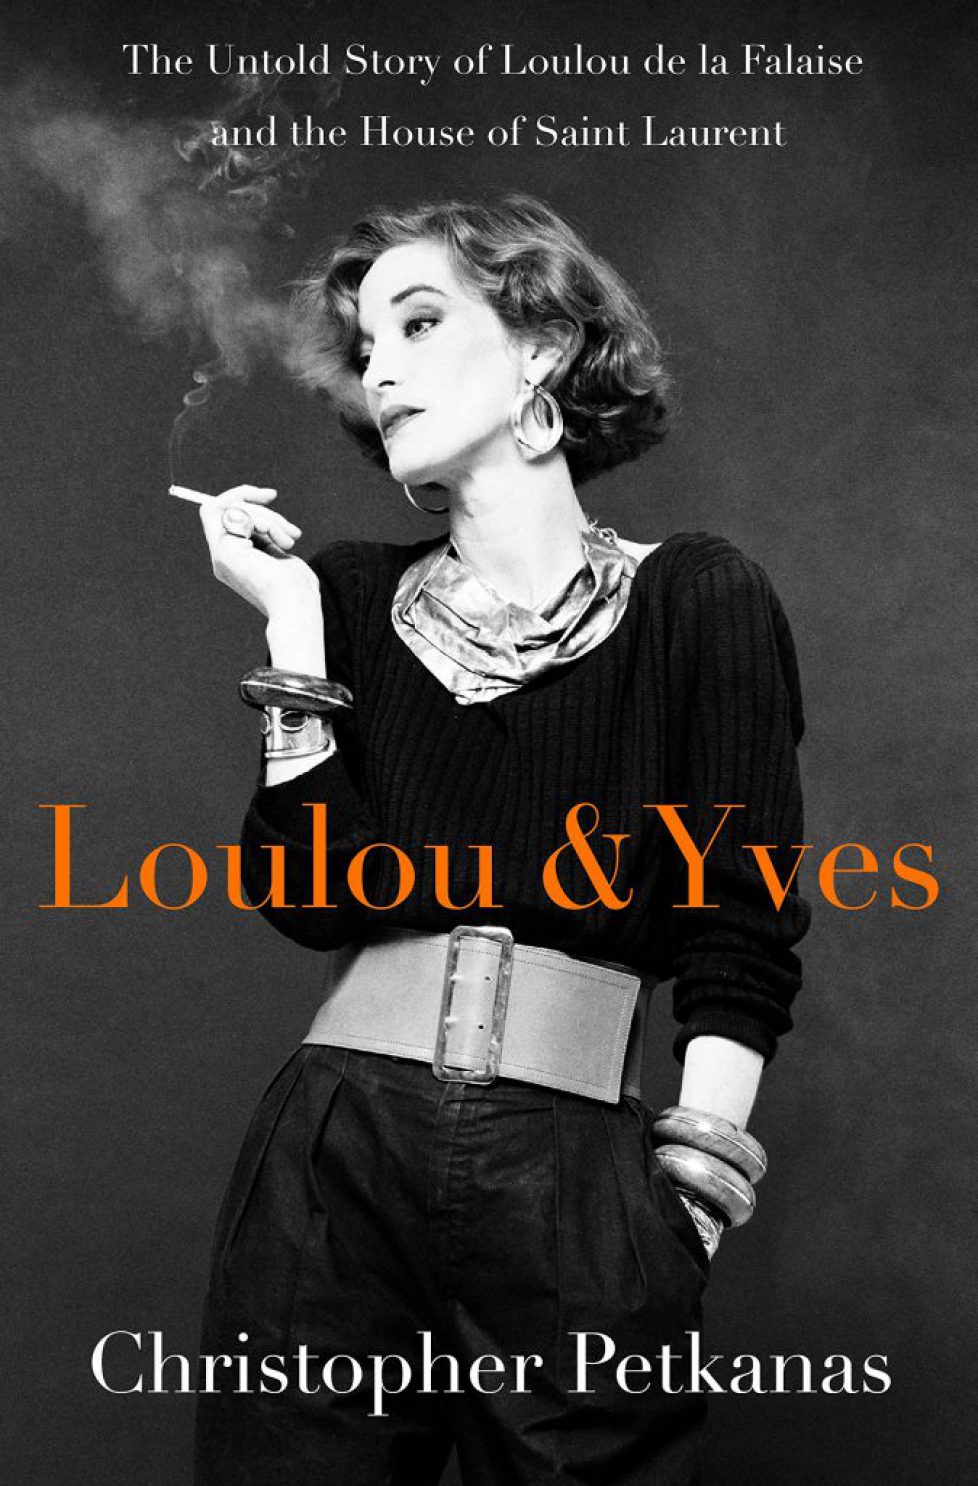 loulou yves